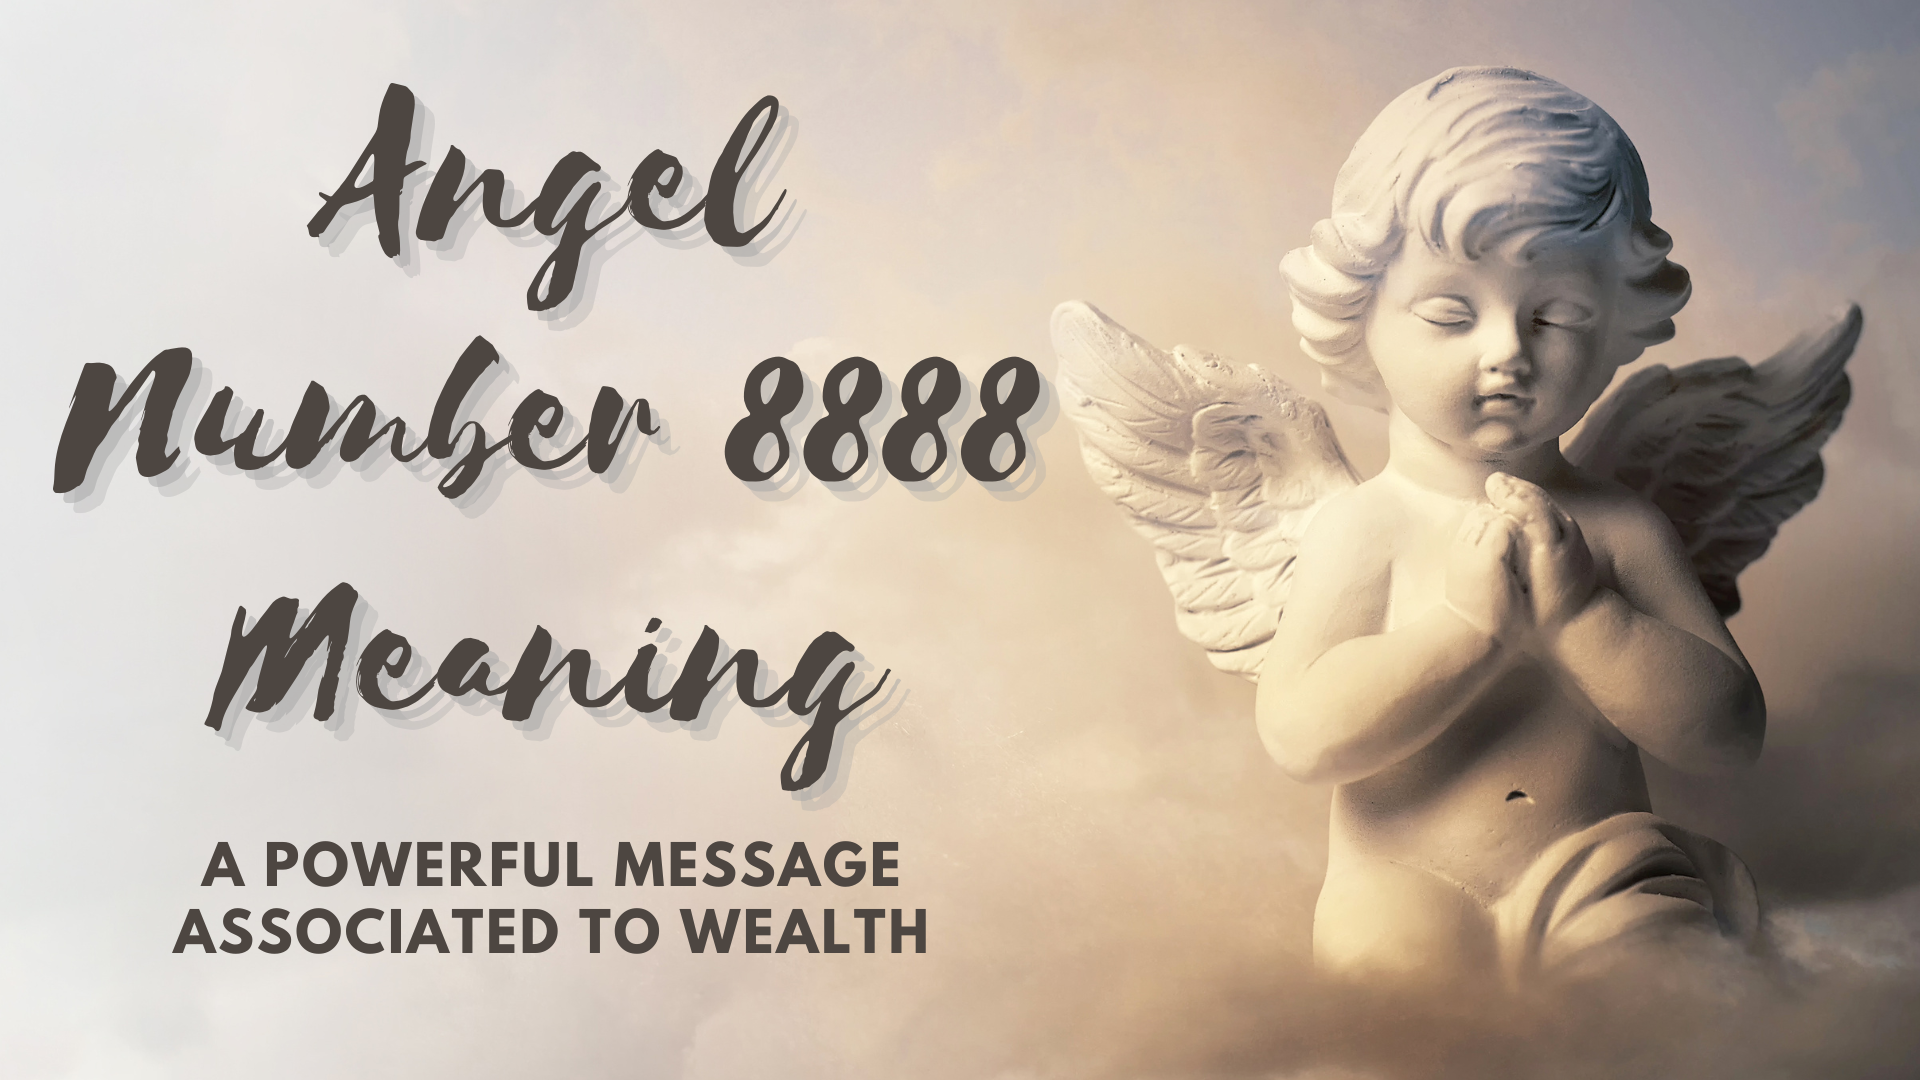 Angel Number 8888 Meaning - A Powerful Message Associated To Wealth